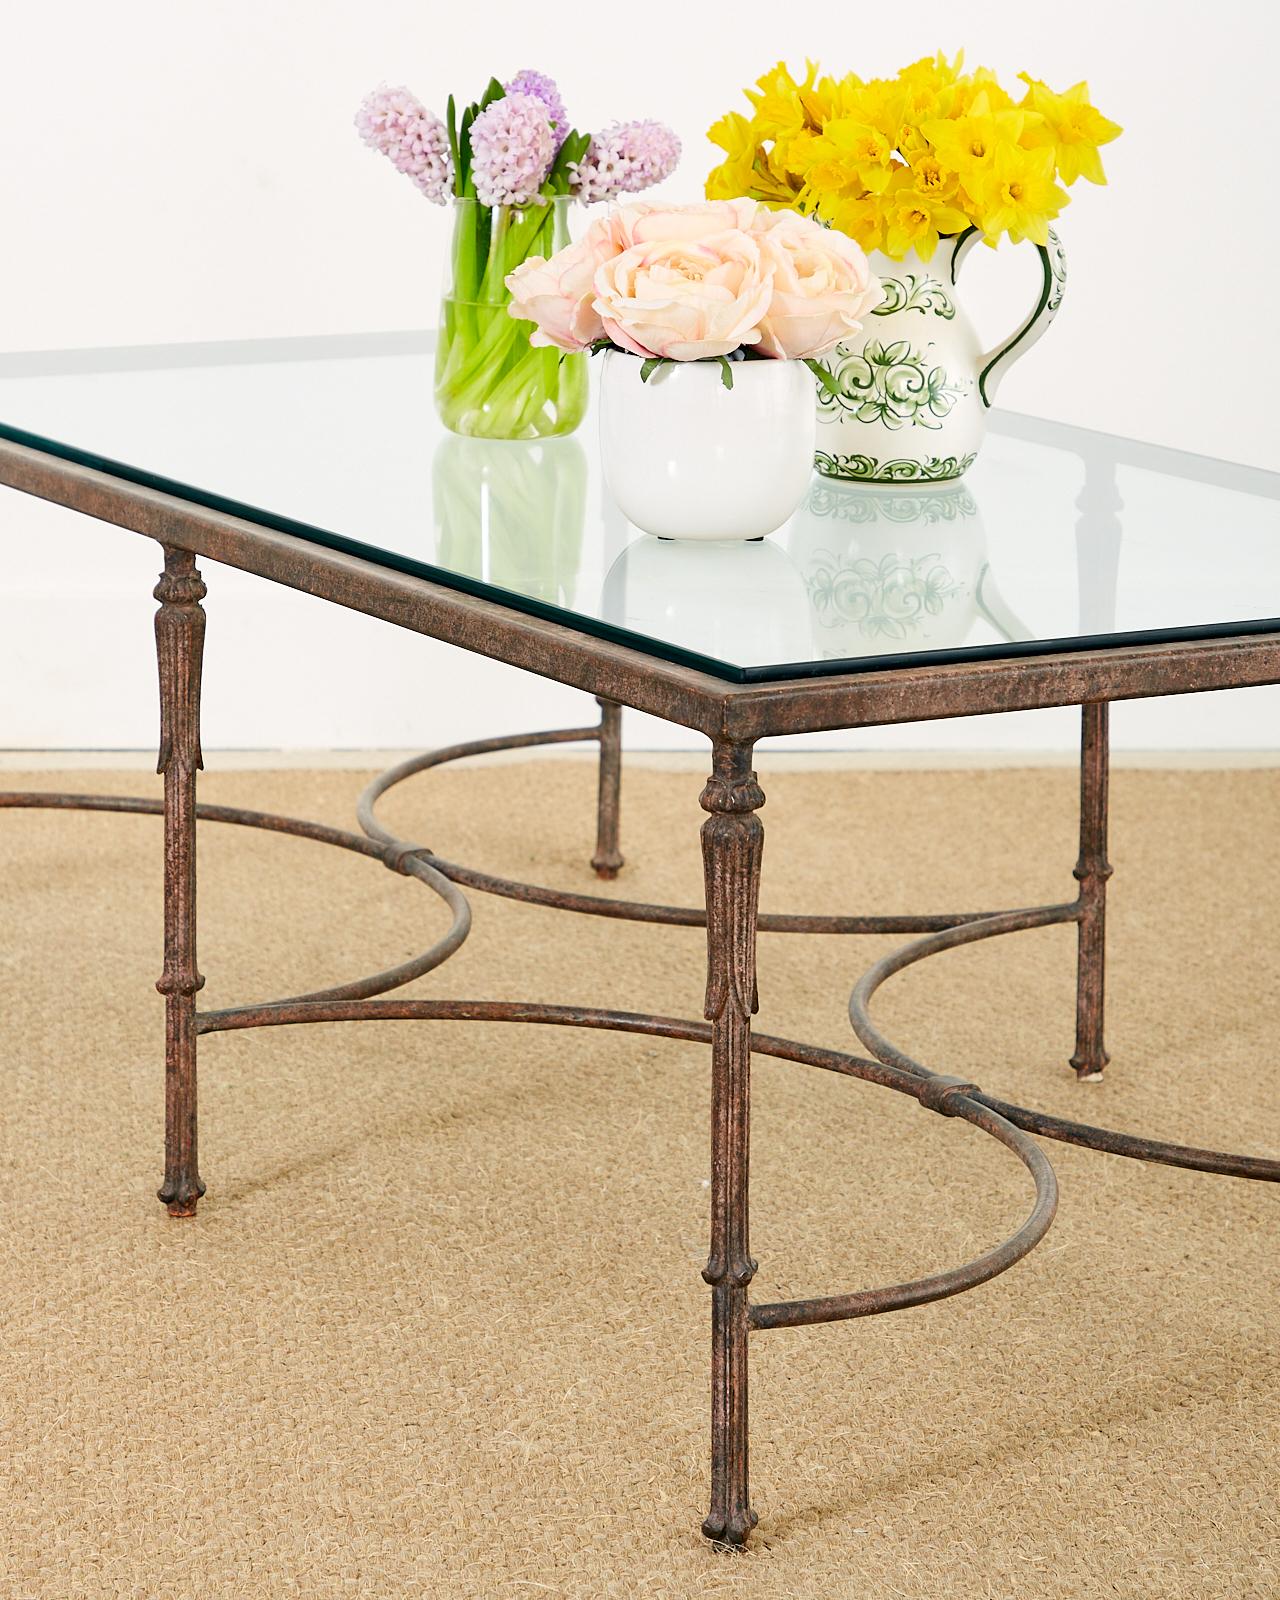 Splendid bronze cocktail or coffee table featuring a patinated metal finish with an aged patina. Crafted in the neoclassical taste in the style and manner of Maison Jansen. Constructed with a steel frame supported by beautifully cast bronze legs.